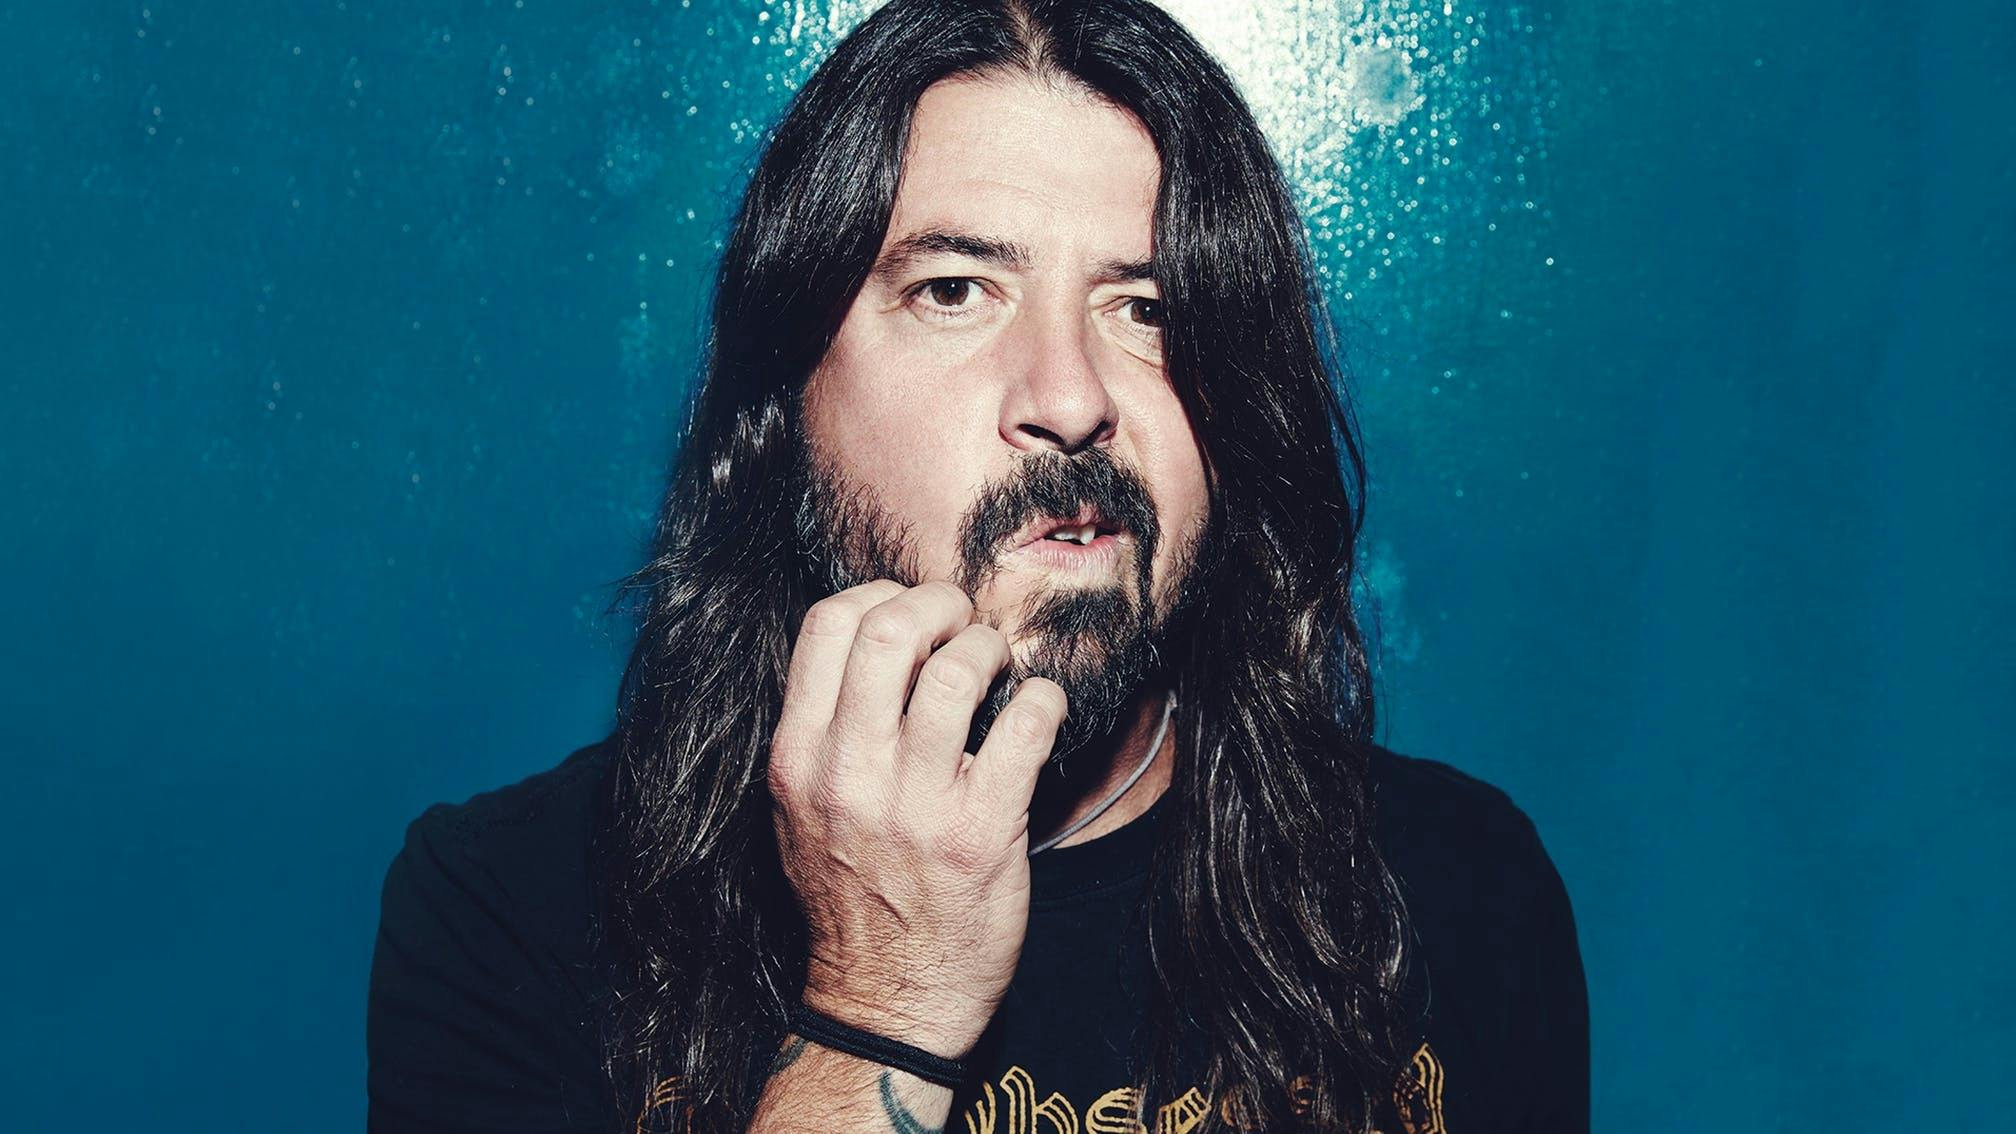 Dave Grohl on writing Smells Like Teen Spirit: "We just thought it was another cool song for the record…"